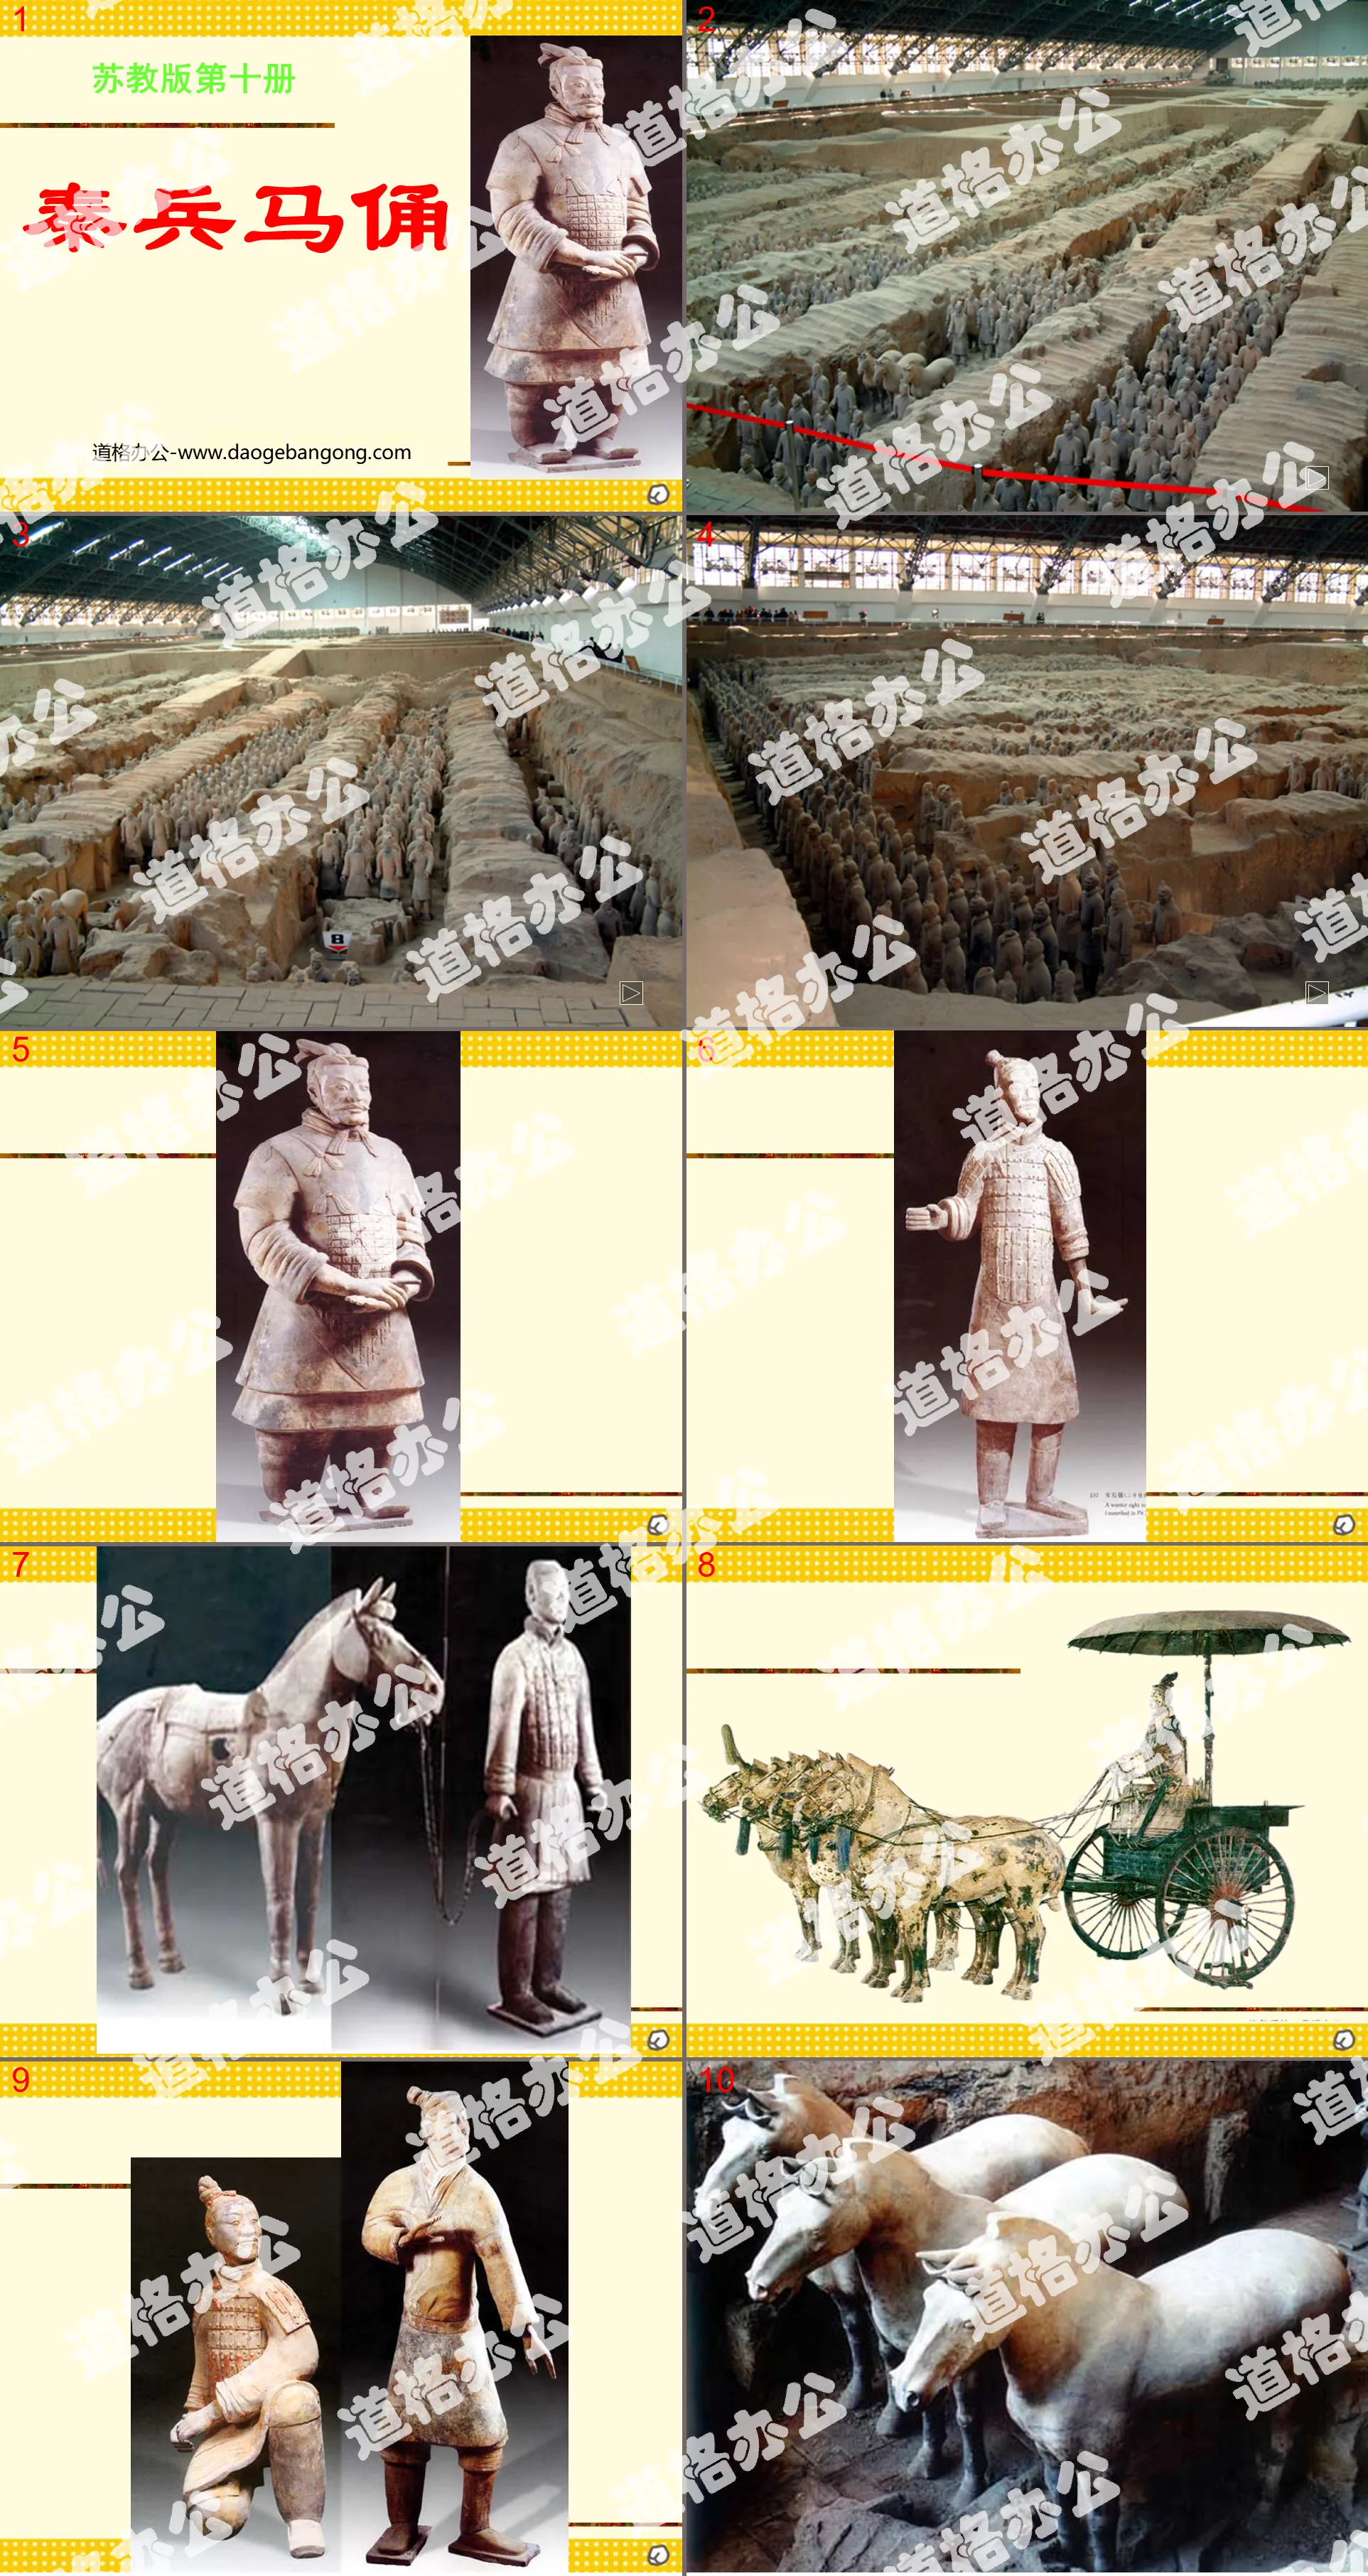 "Qin Terracotta Warriors and Horses" PPT courseware download 3